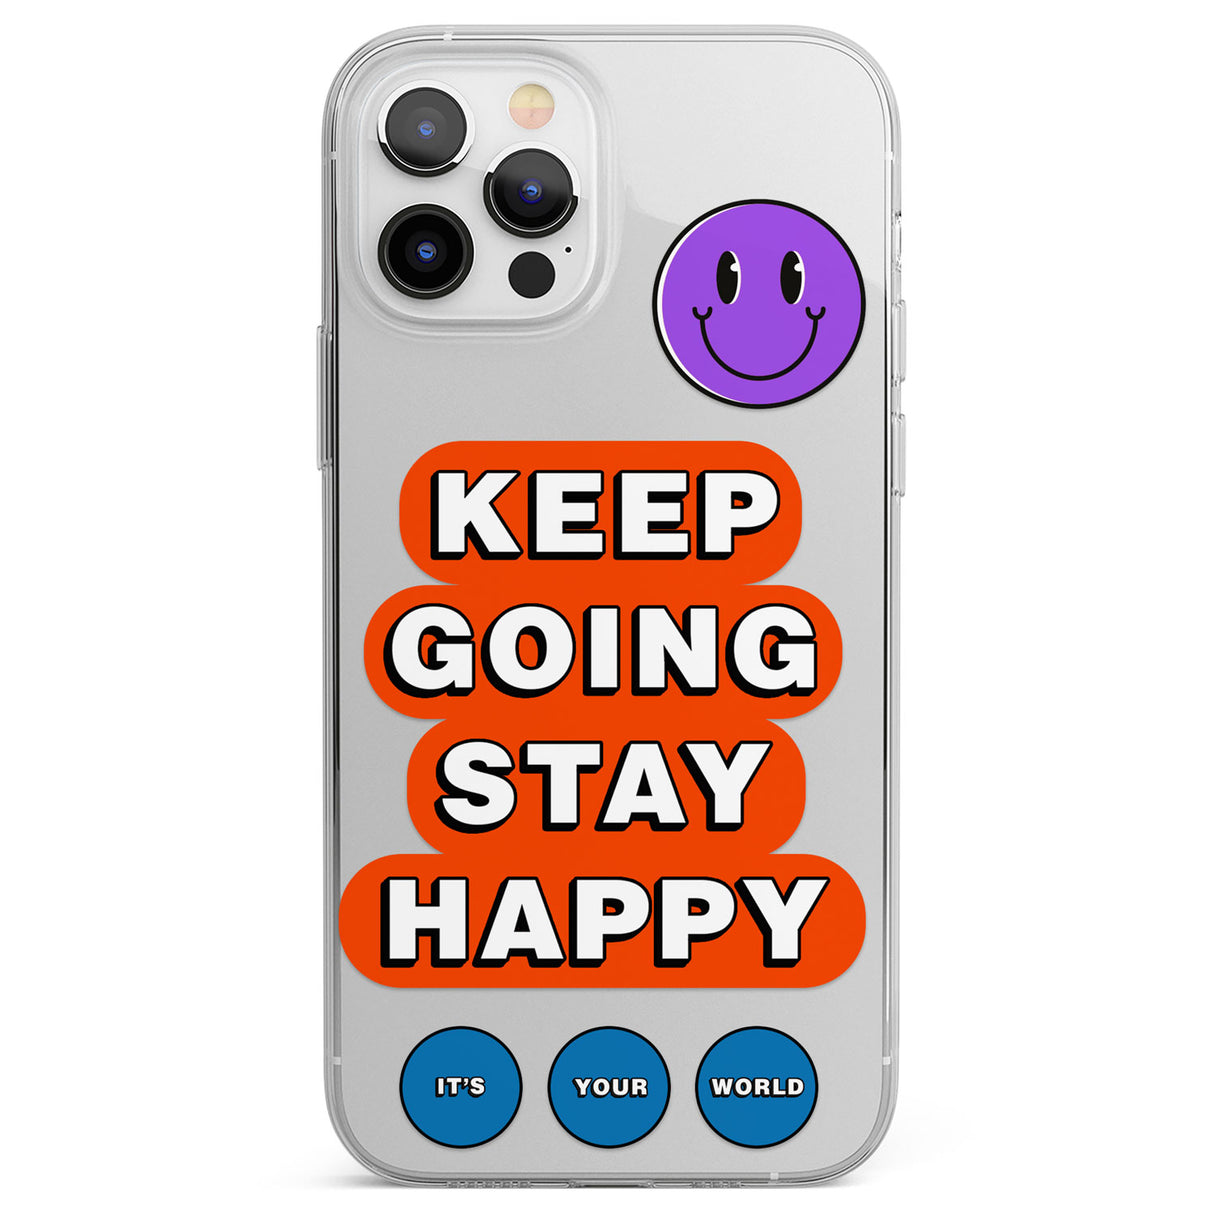 Keep Going Stay Happy Phone Case for iPhone 12 Pro